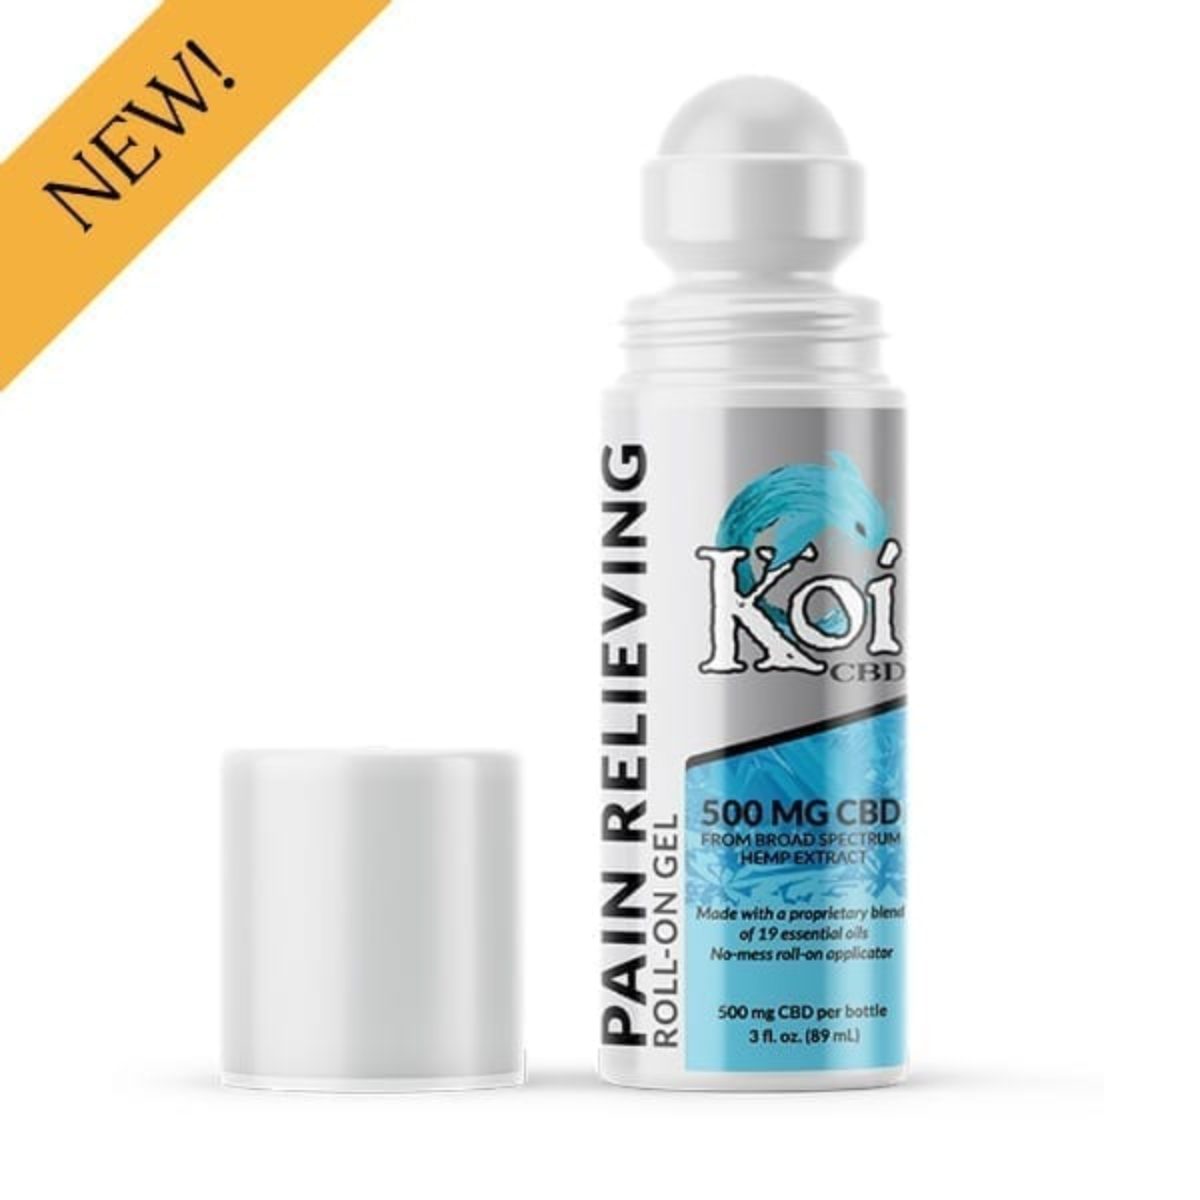 Koi CBD Pain Relieving Gel Roll-On